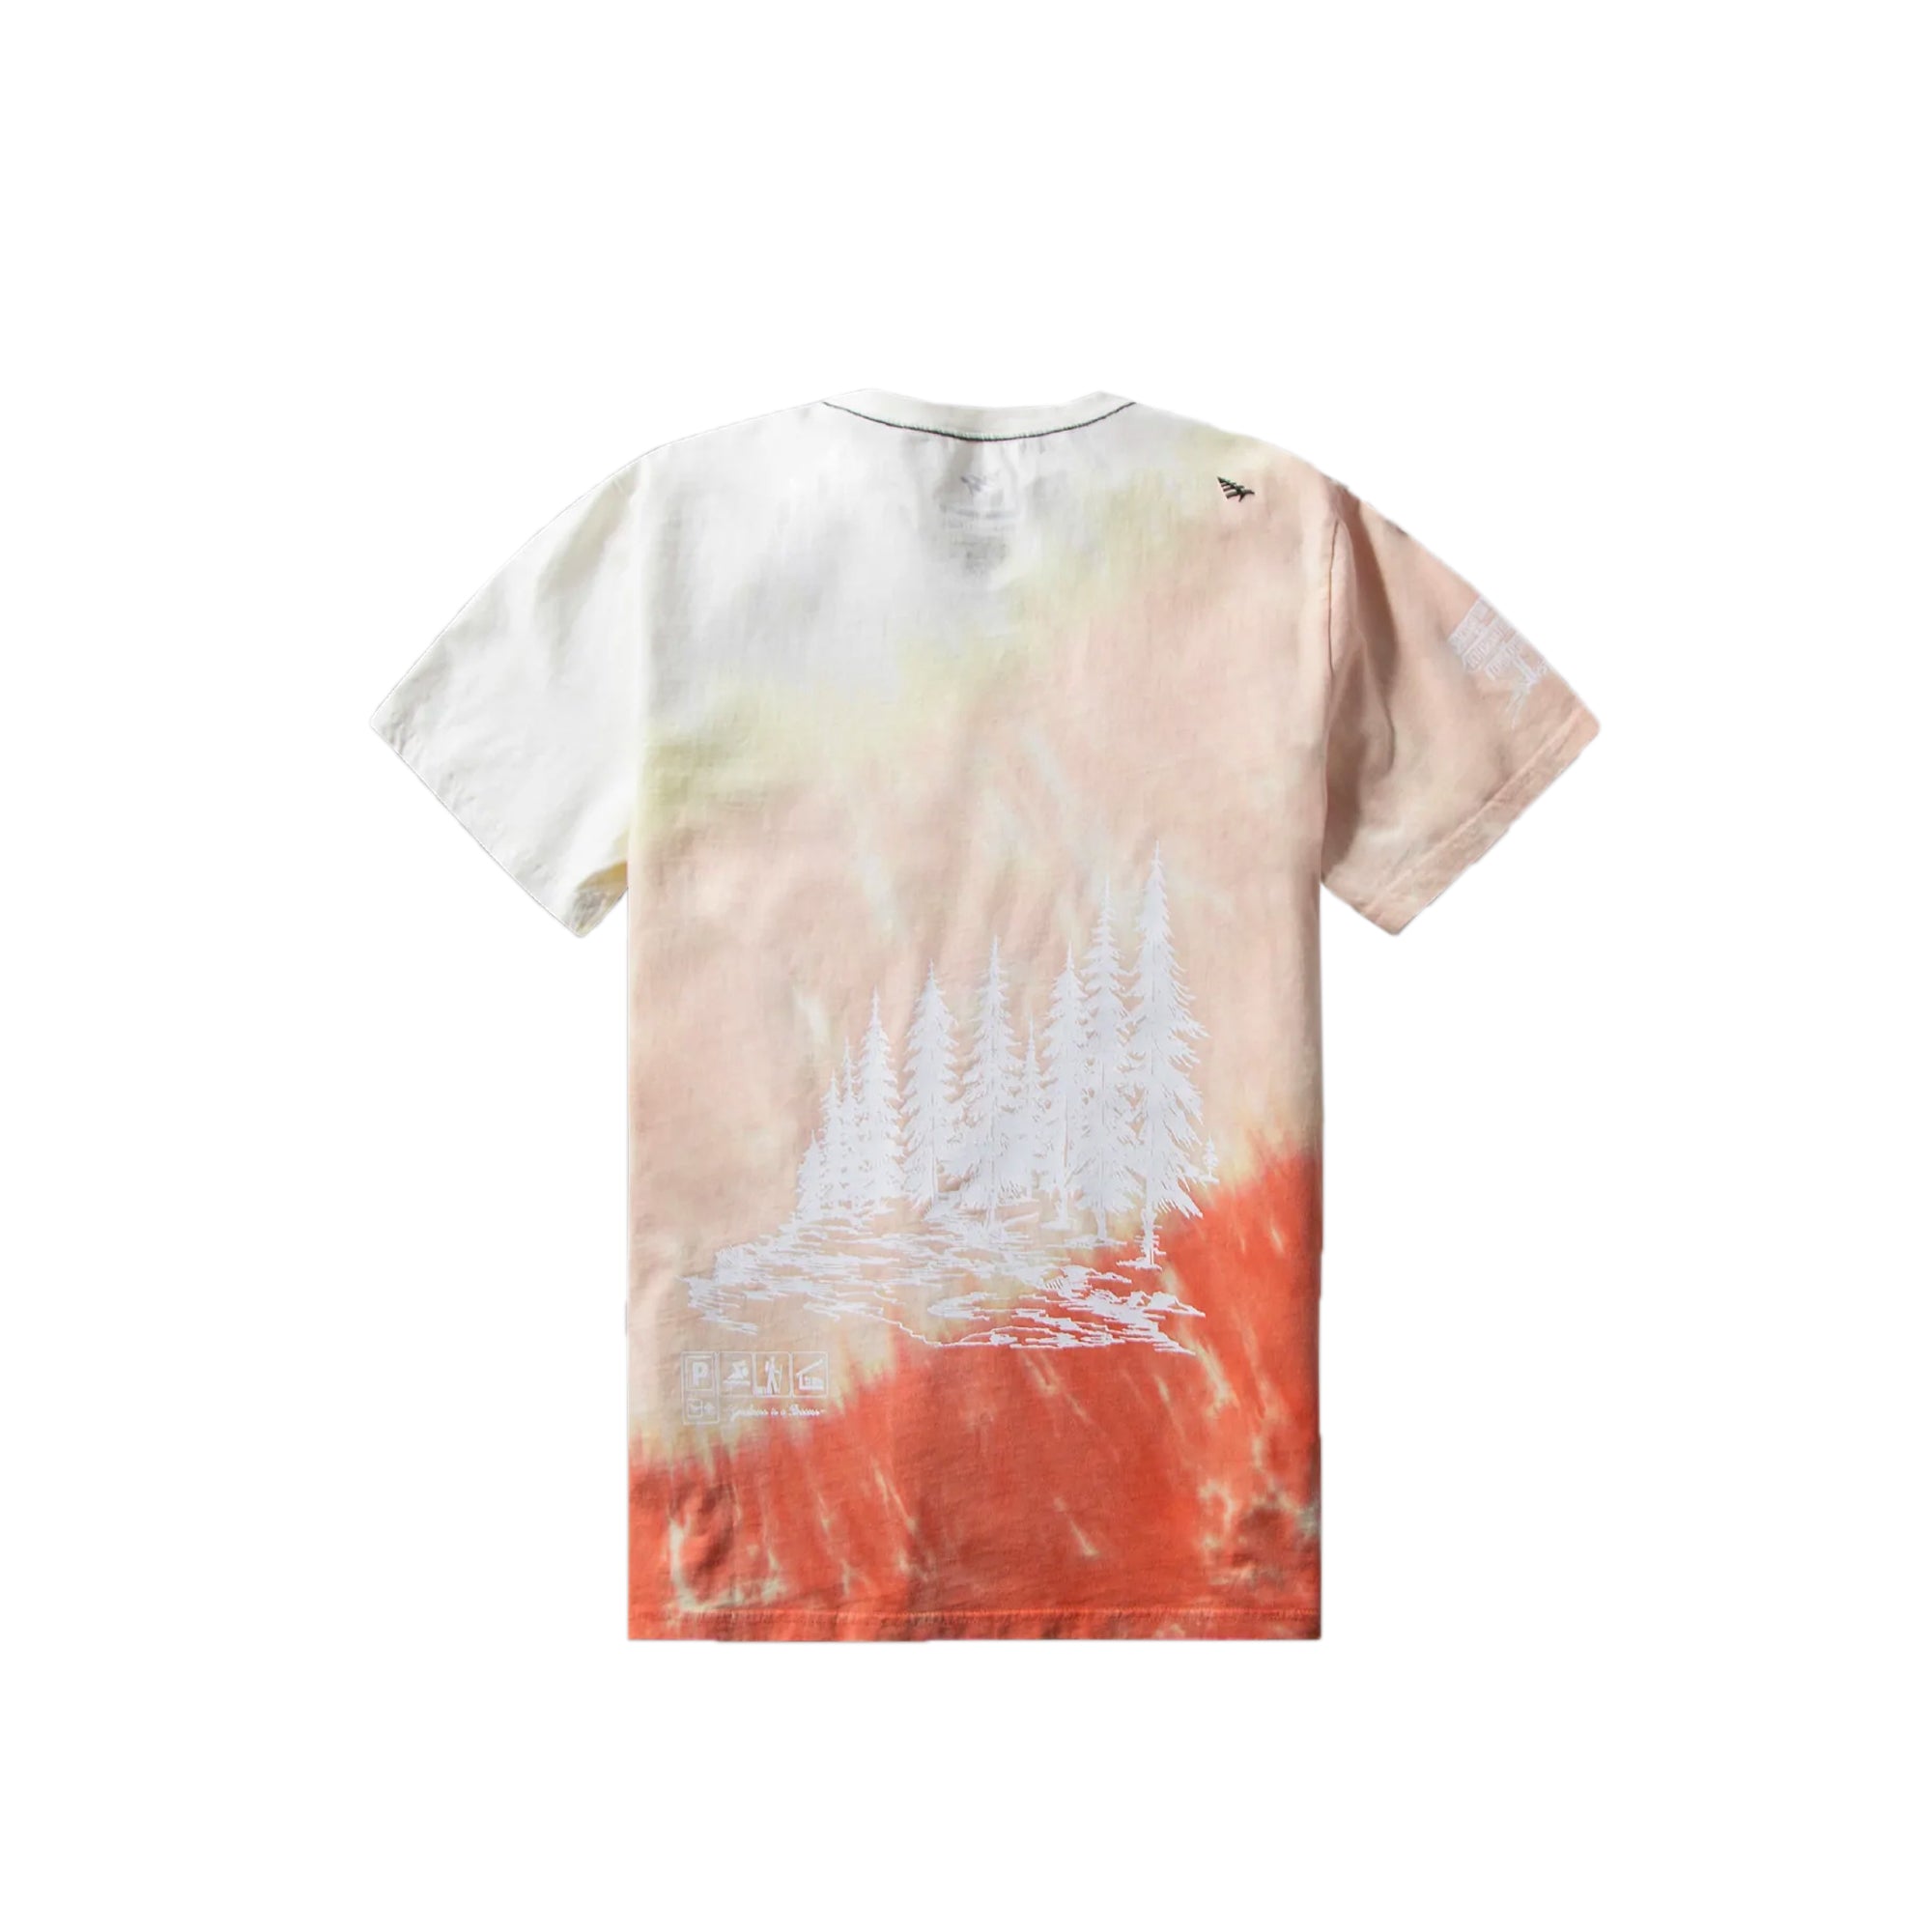 Paper Planes Mens Great Pine SS Tee